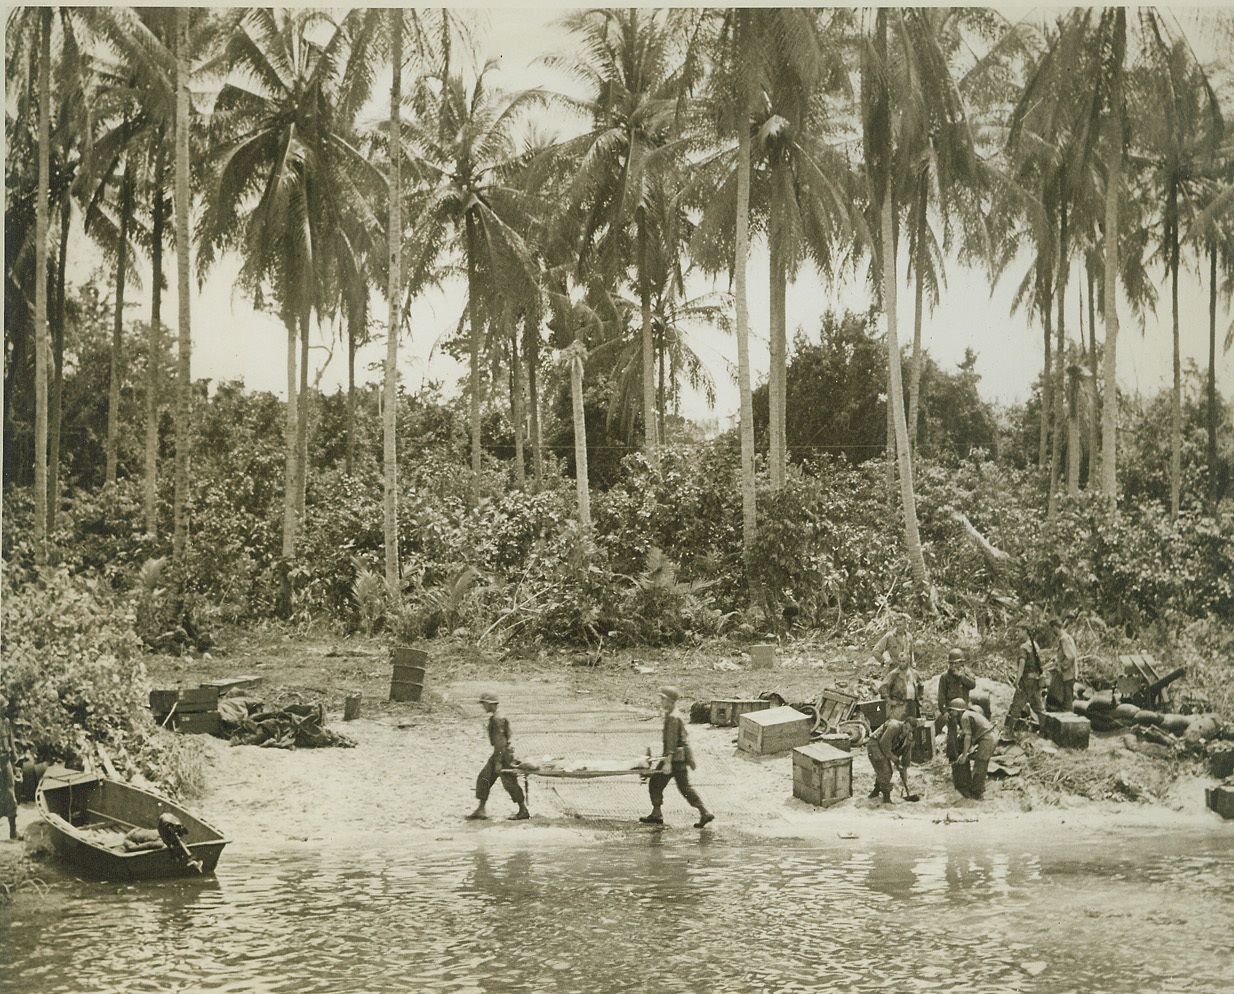 Wounded in Battle, 12/29/1943. Arawe, New Britain – Wounded in the fighting at Arawe, a stretcher-borne Yank is carried through the shallow water on the island’s shore. A group of Yanks work on the littered beach at right. Latest reports from New Britain indicate that our troops have pushed to within striking distance of the Cape Gloucester airstrips, 50 miles southeast of Arawe Credit: -WP-(Photo by Thomas L. Shafer, ACME Correspondent for War Pool);